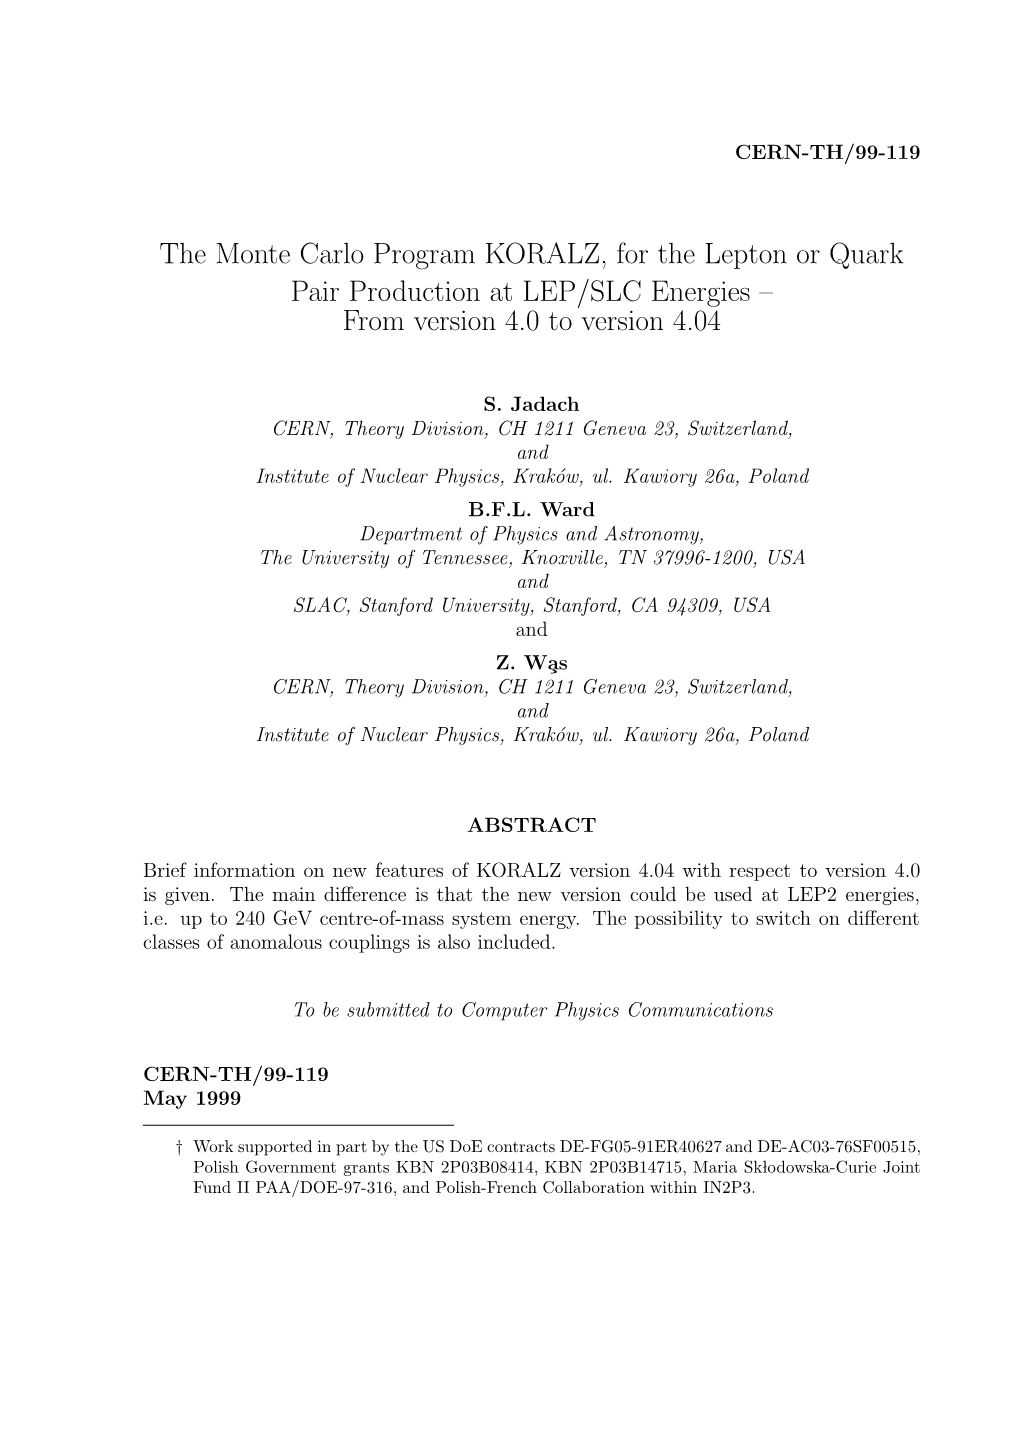 The Monte Carlo Program KORALZ, for the Lepton Or Quark Pair Production at LEP/SLC Energies – from Version 4.0 to Version 4.04